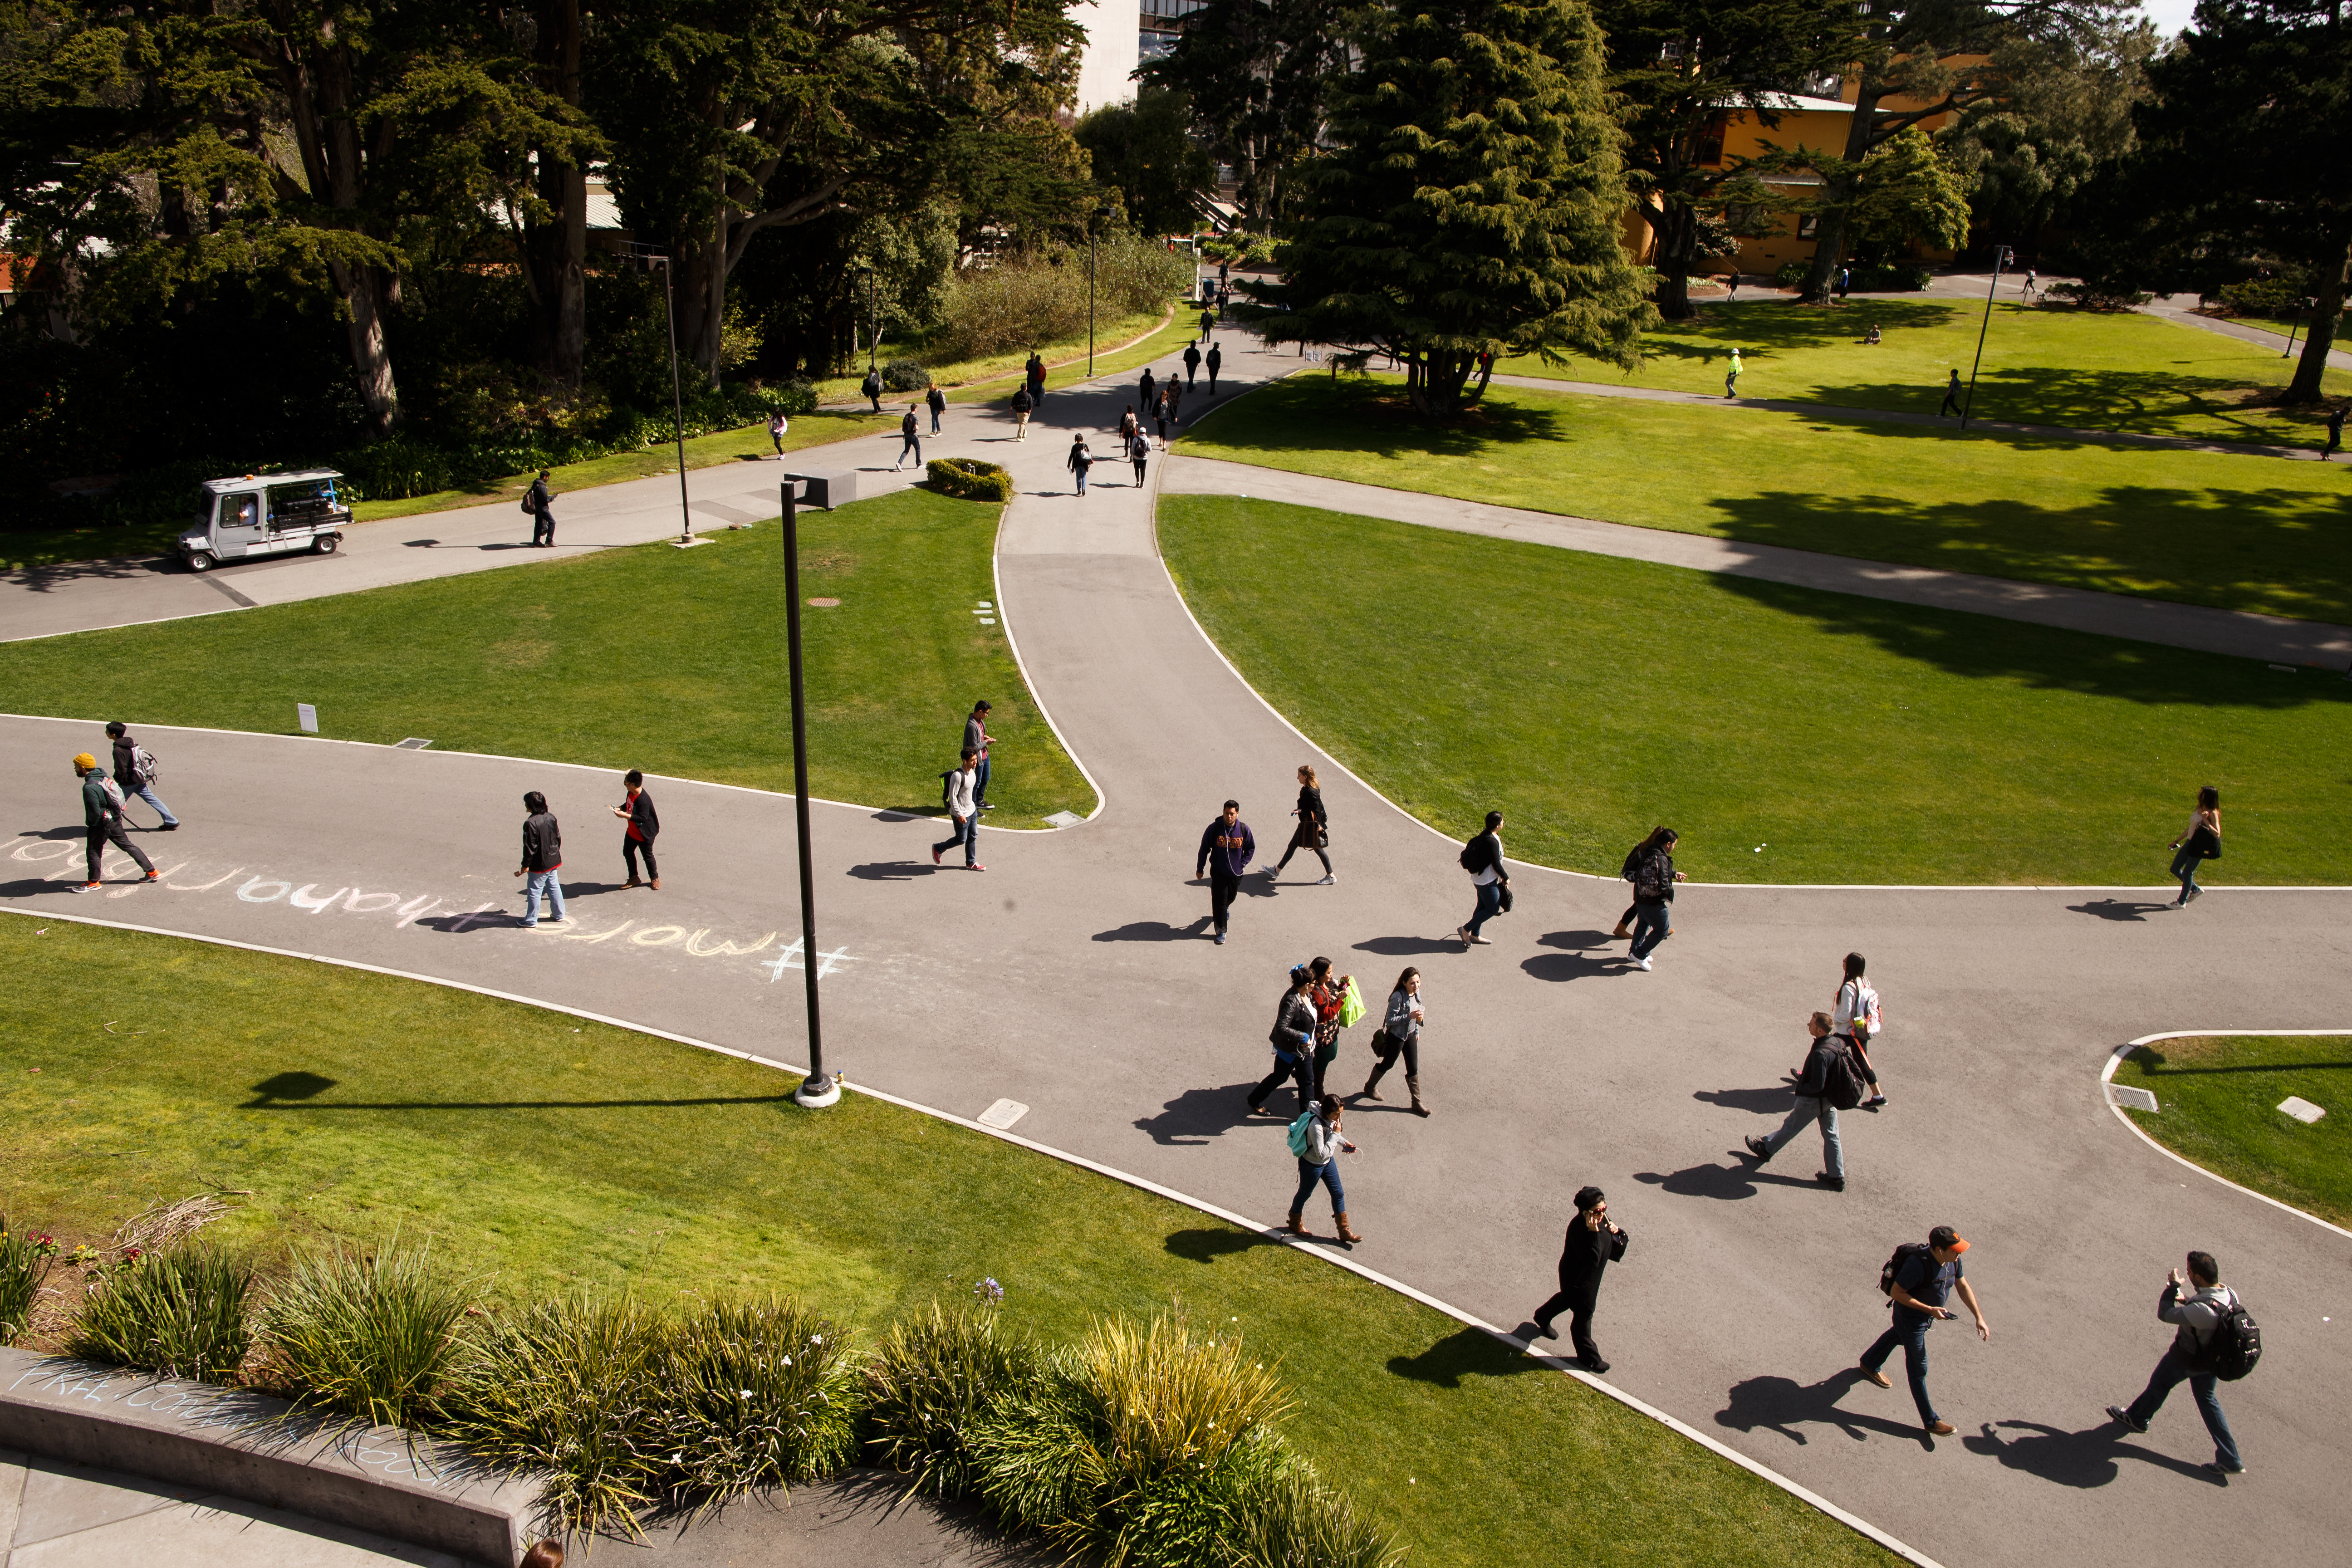 Pathways on campus with students walking in various directions